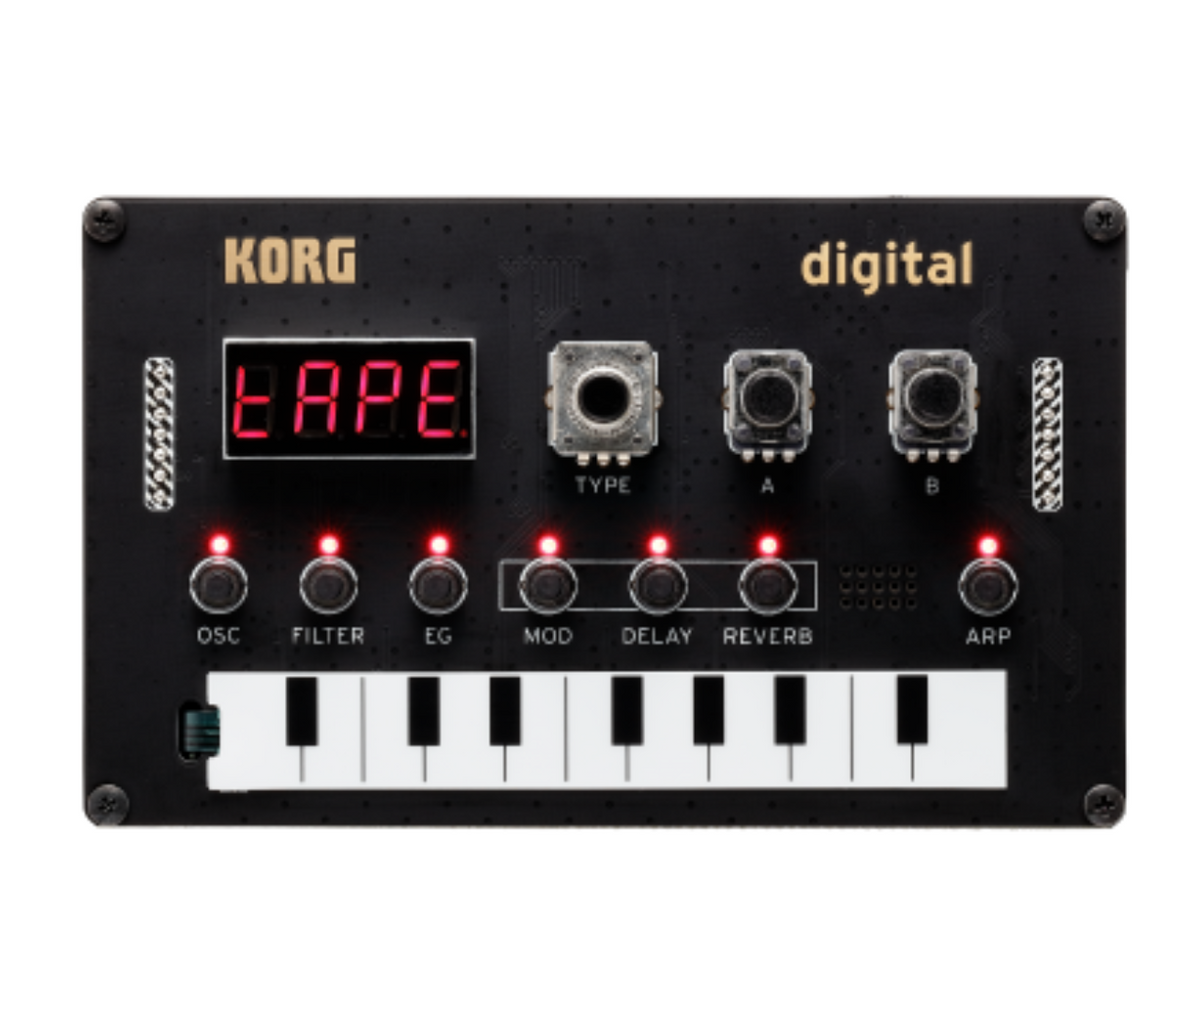 KORG NTS-1 digital kit Programmable Best Sound Synthesizer Kit Compact Nu:Tekt Powerful Synth and Multi-effects Engine